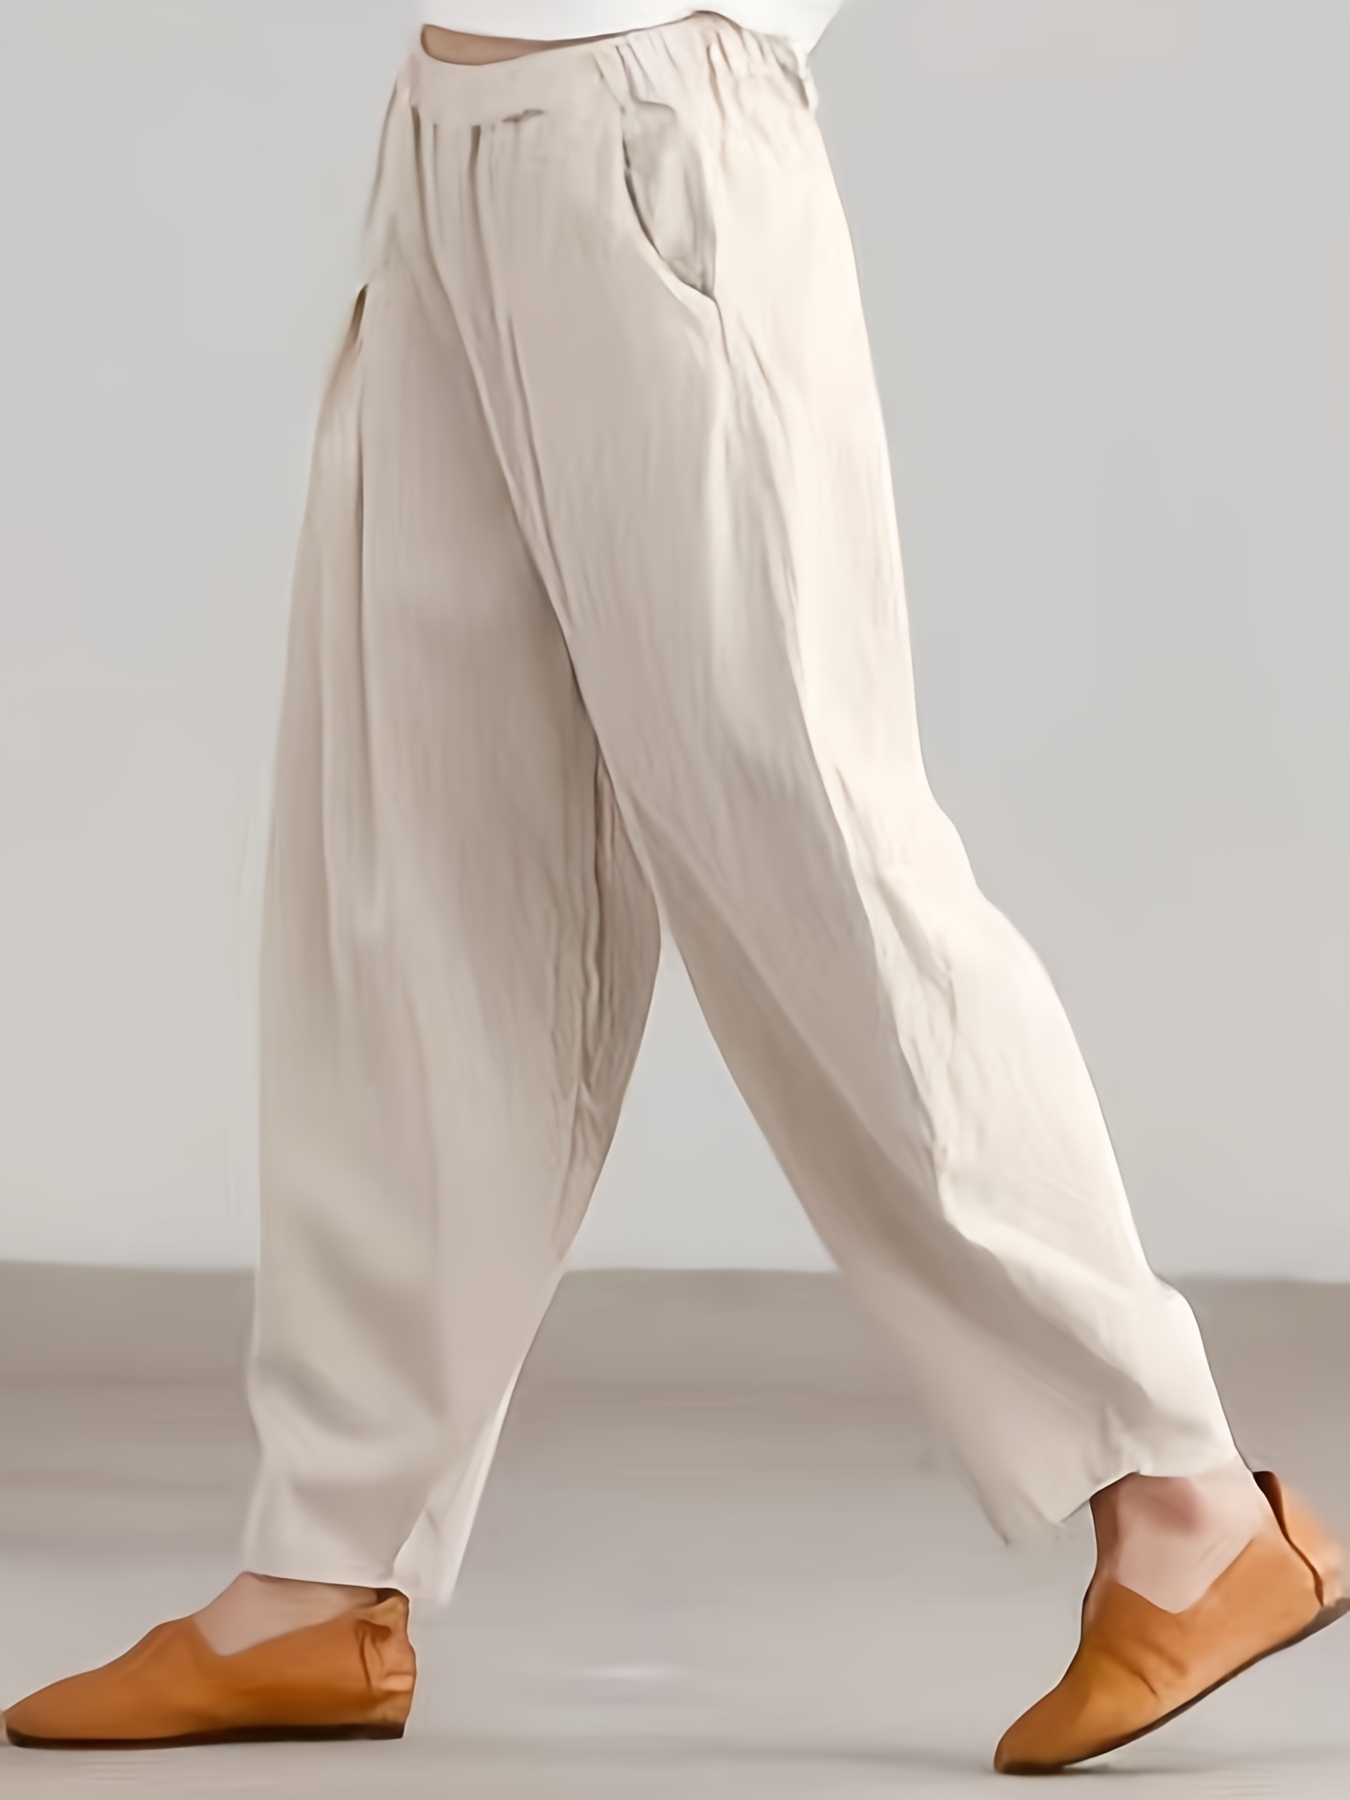 elastic high waist pants casual solid pants for spring summer womens clothing details 2